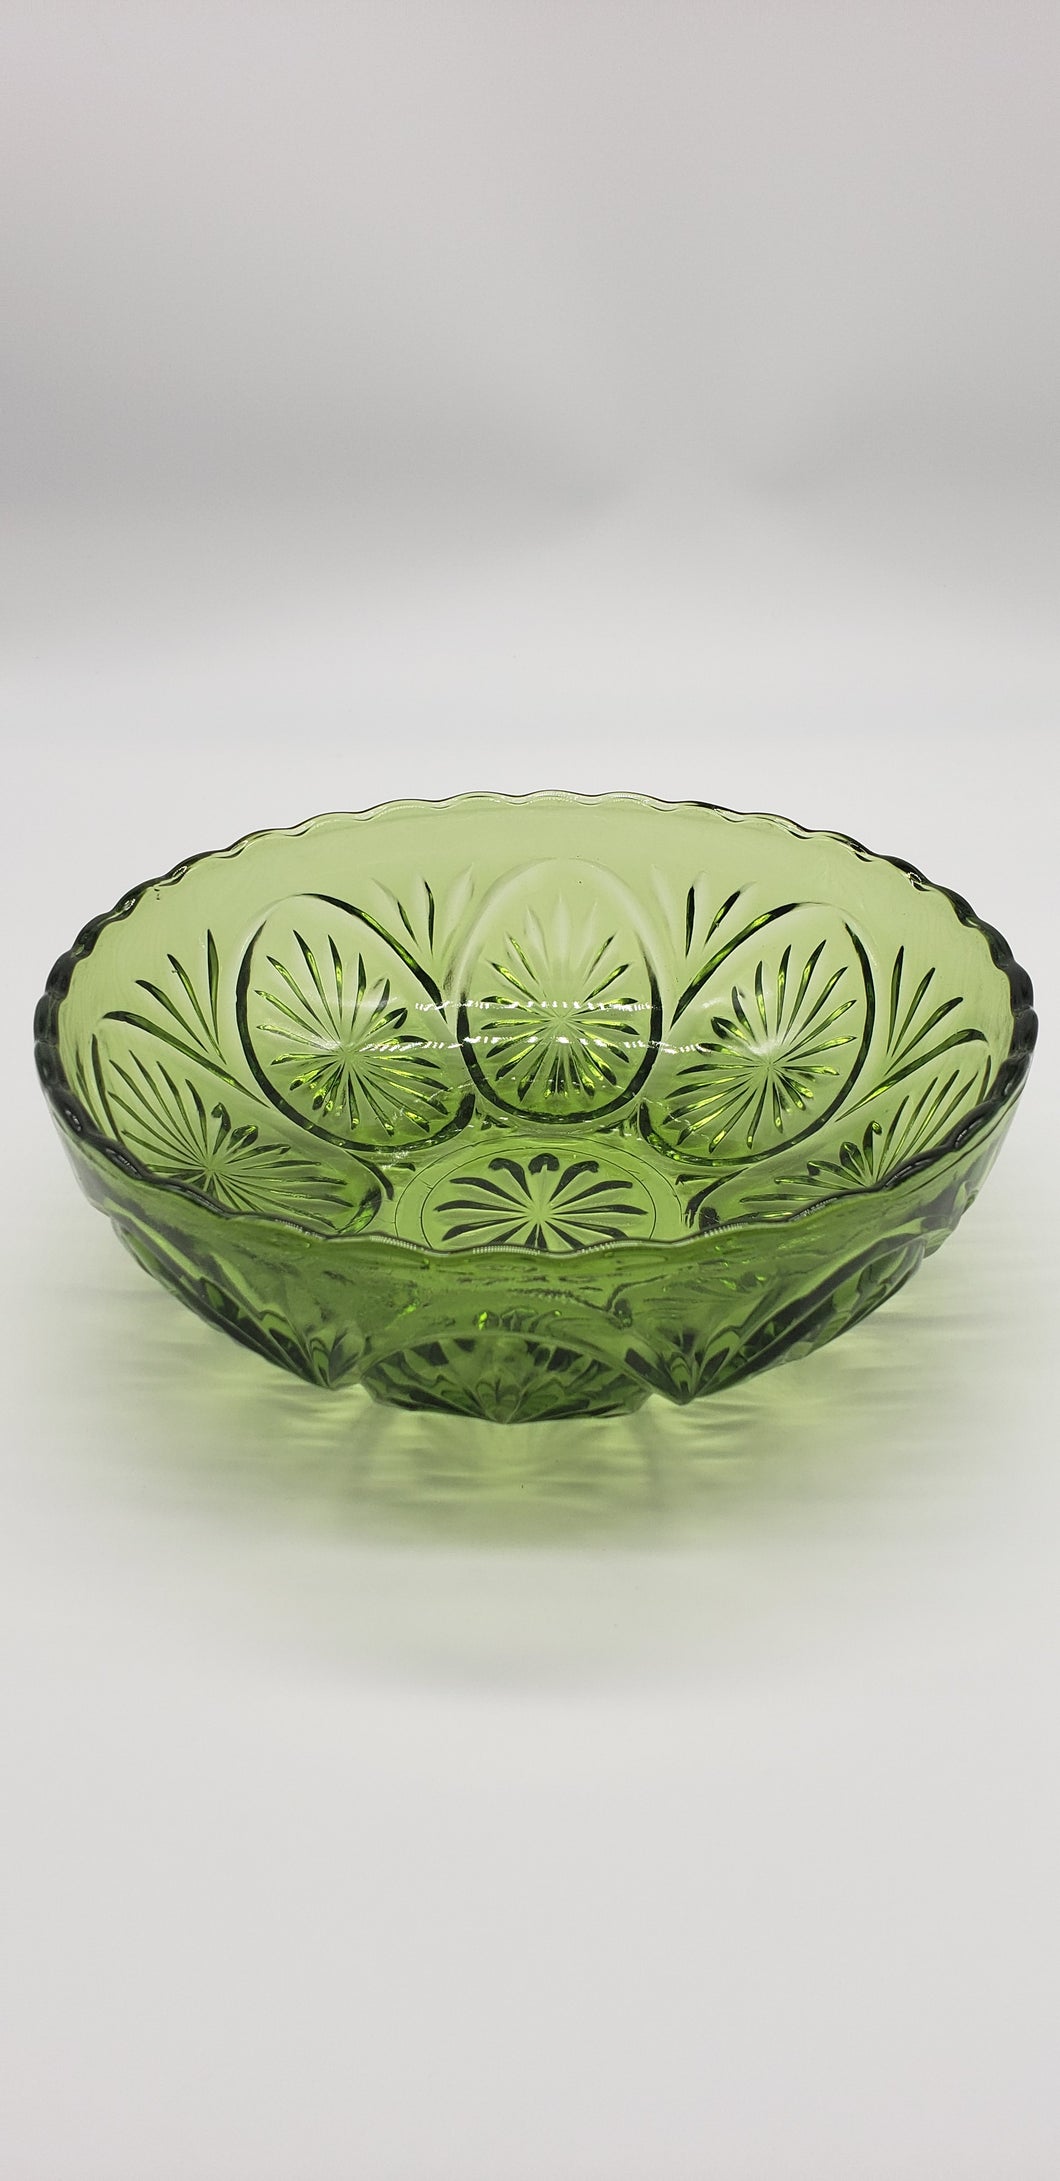 Deep Forrest Emerald Green glass bowl with Ovals, Stars and Diamonds